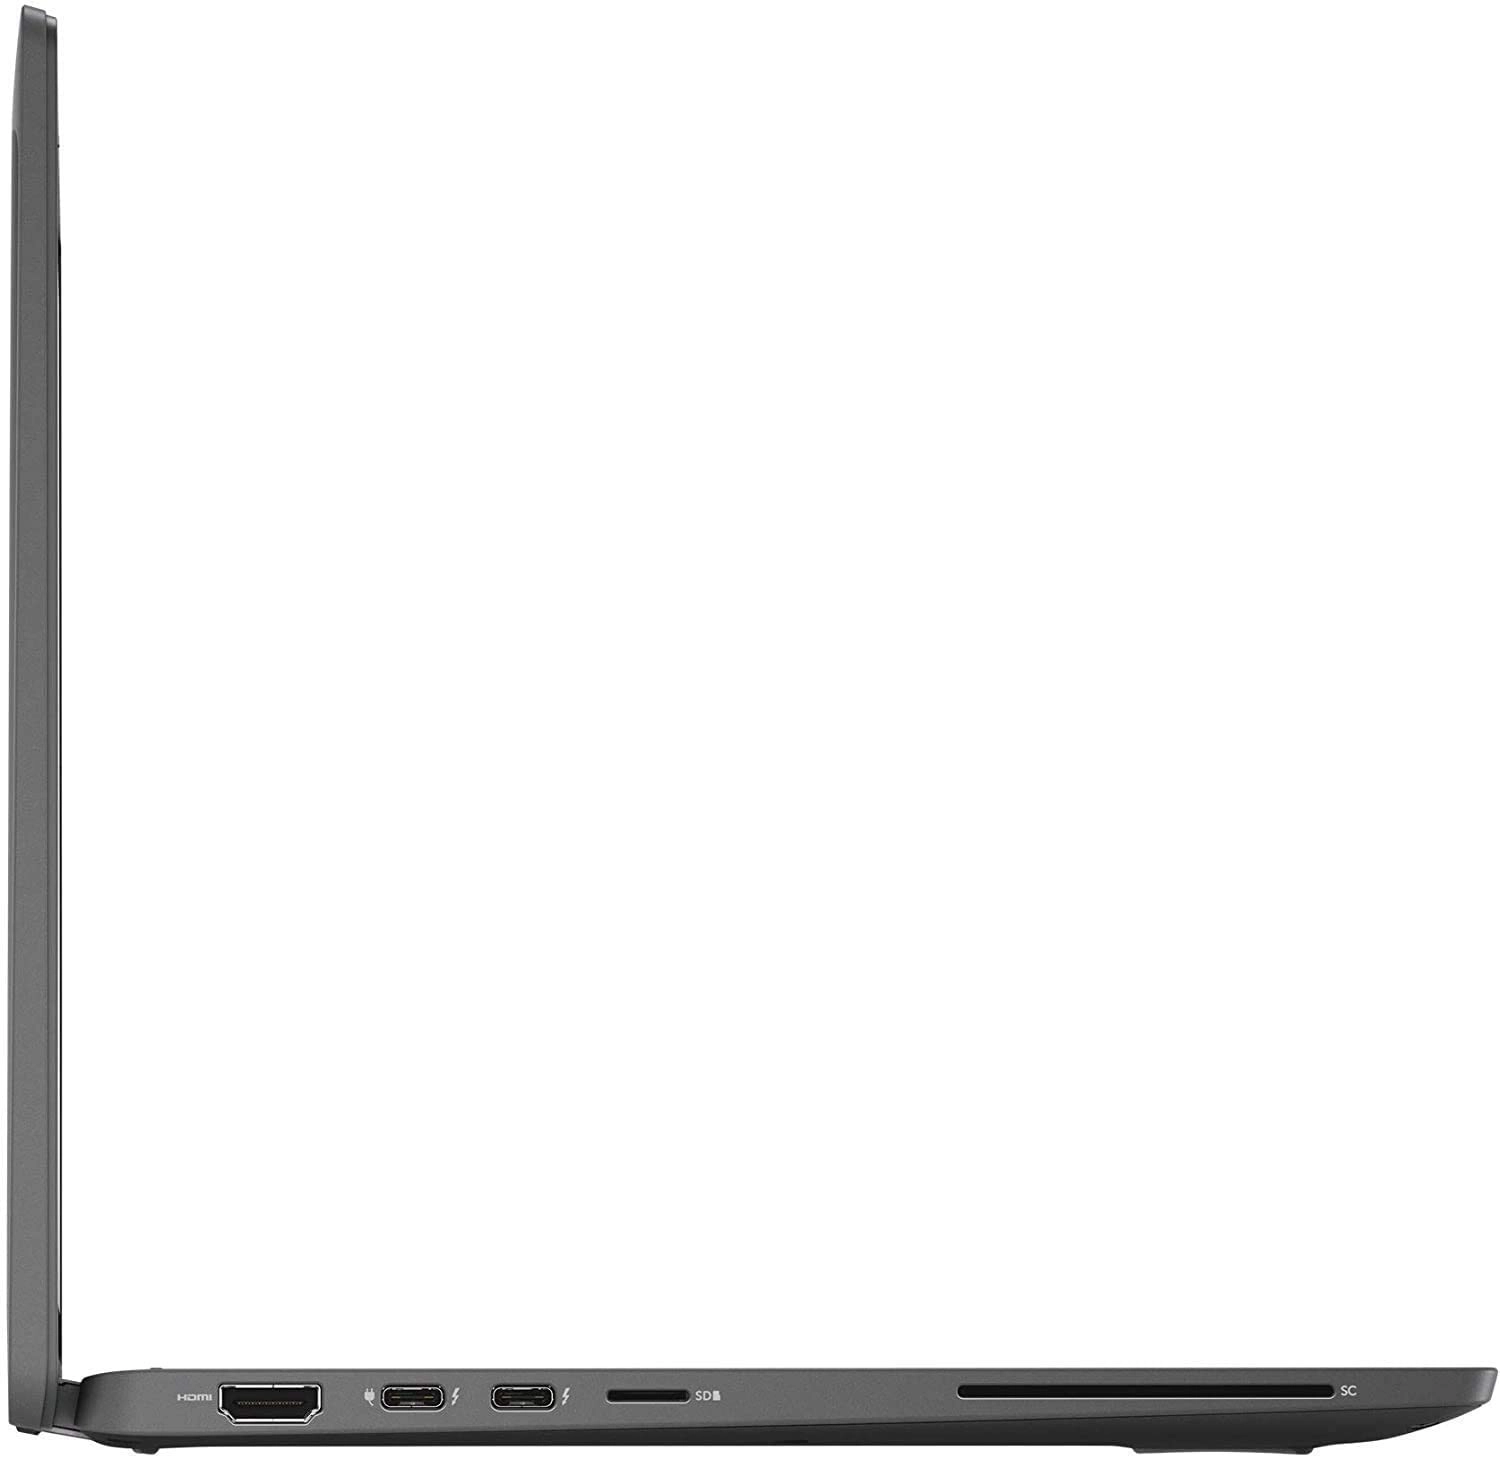 Dell YG5T0 laptop image